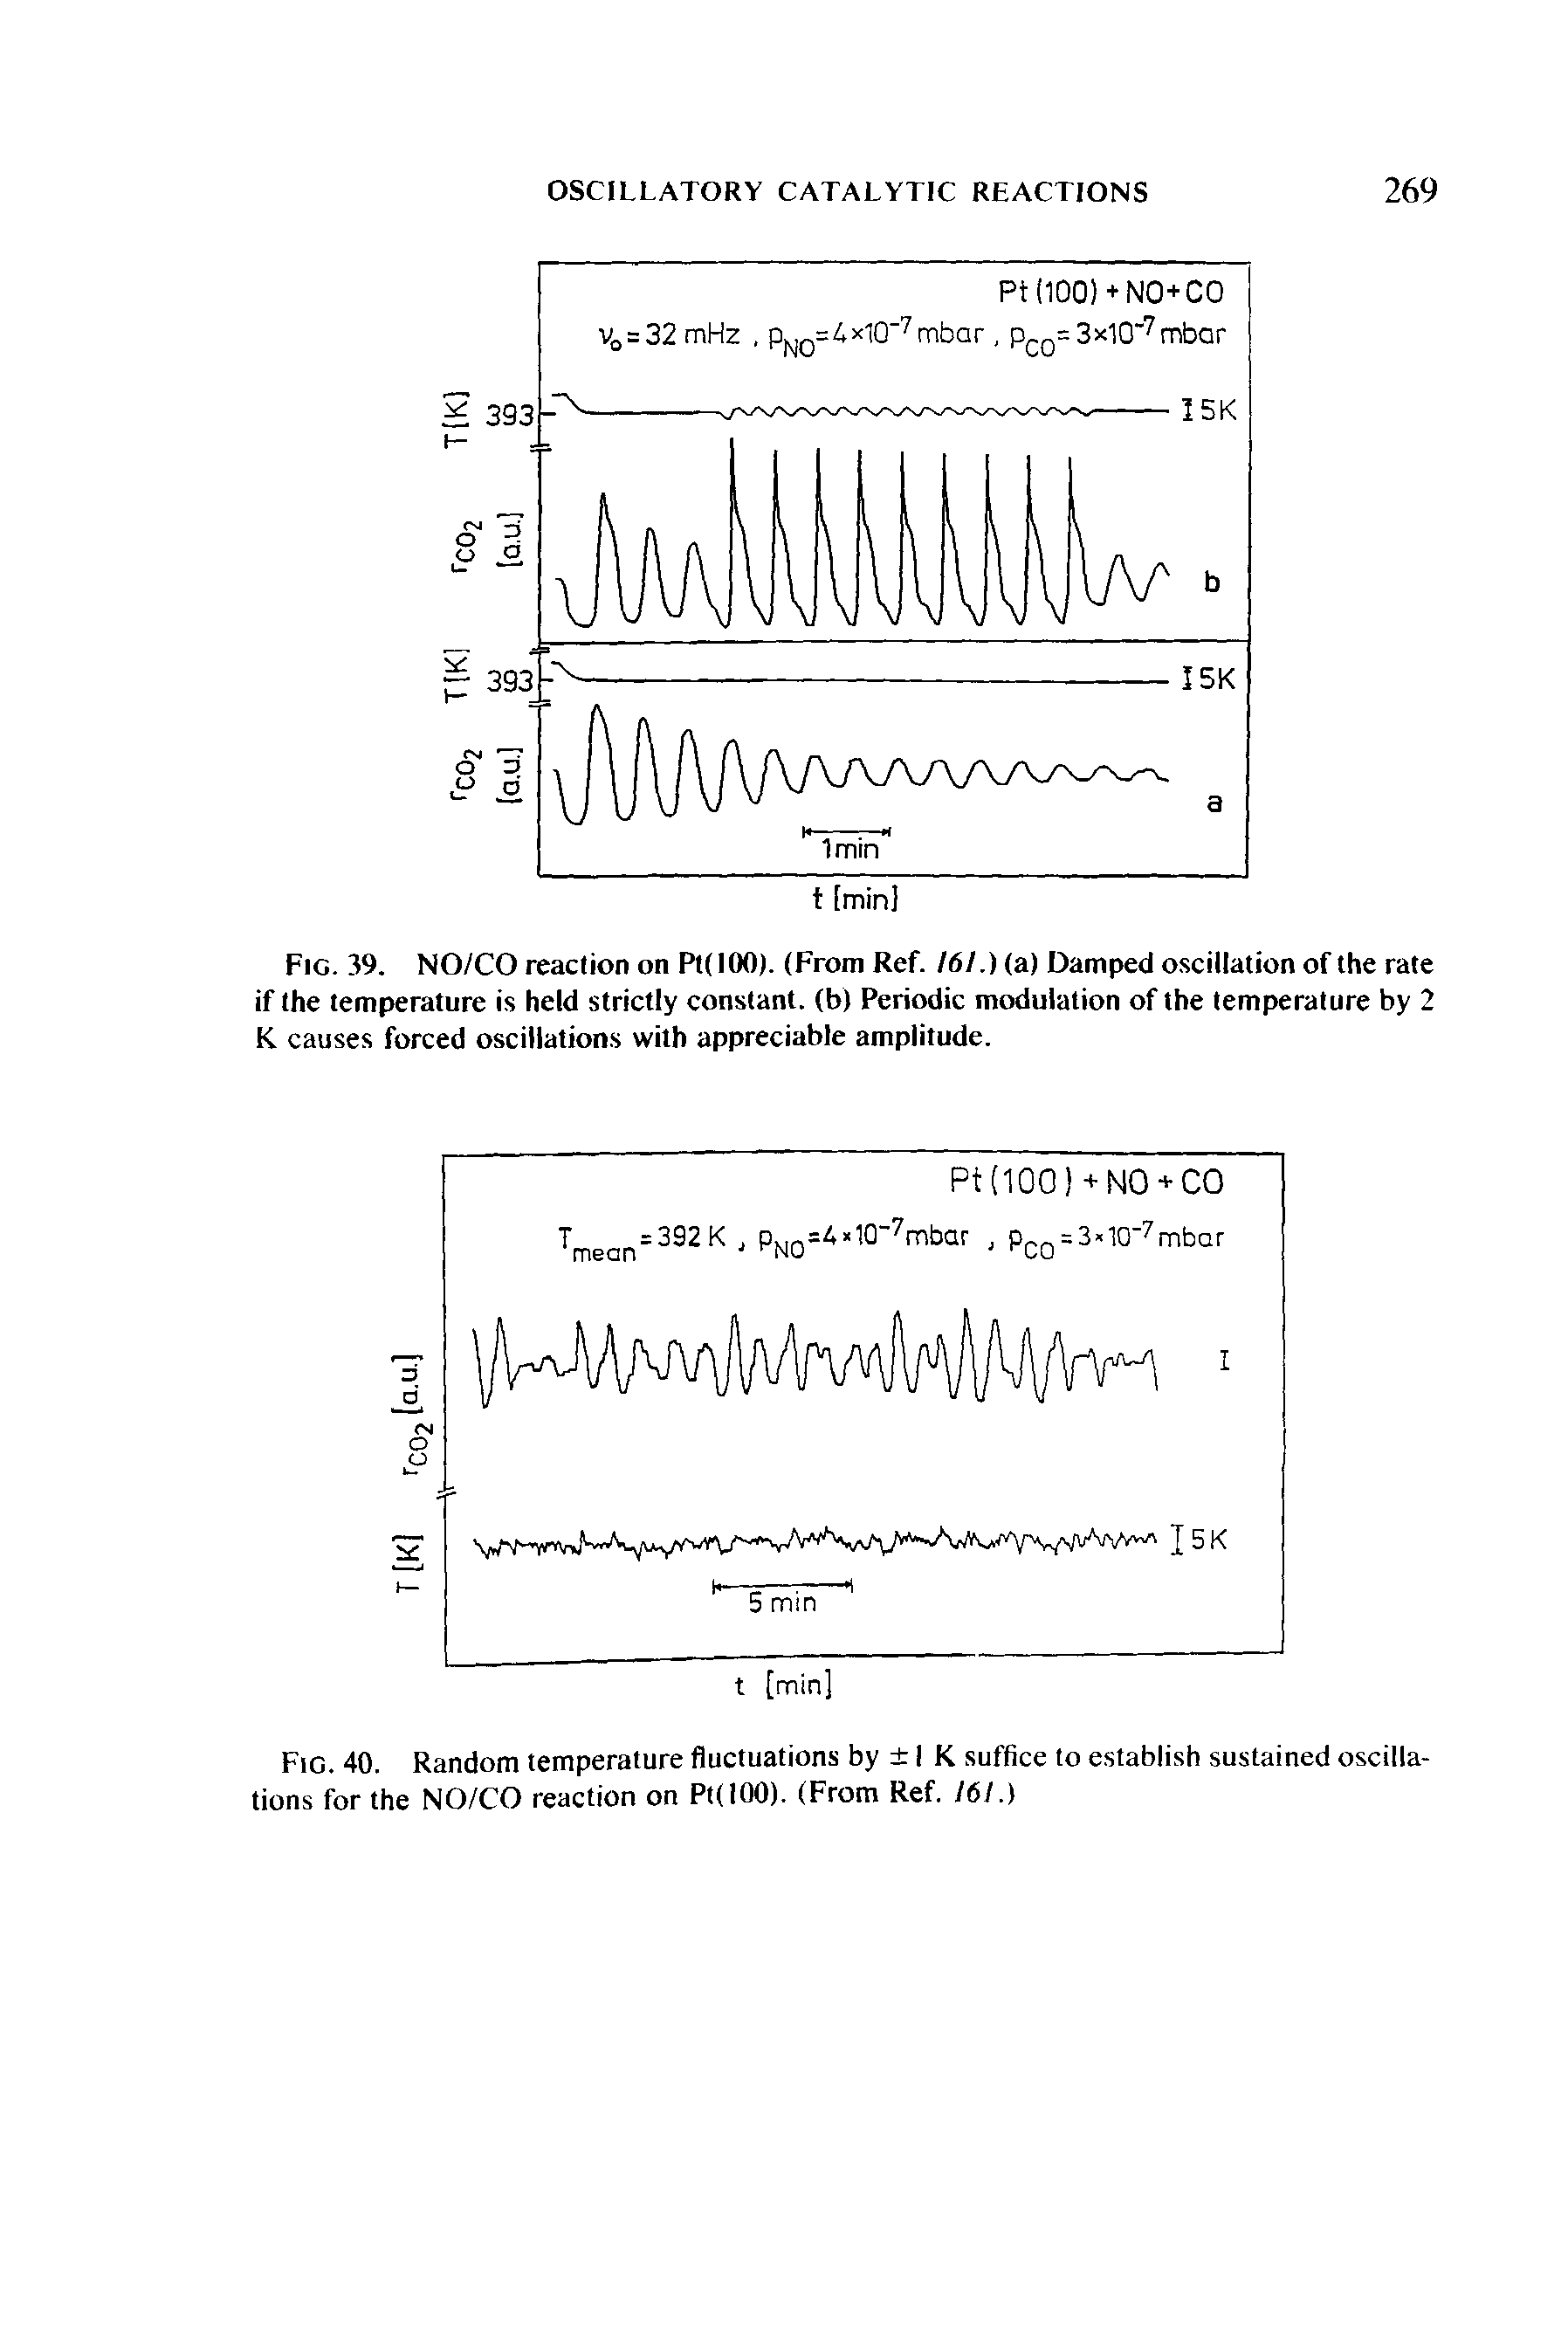 Fig. 39. NO/CO reaction on Pt(IOO). (From Ref. 161.) (a) Damped oscillation of the rate if the temperature is held strictly constant, (b) Periodic modulation of the temperature by 2 K. causes forced oscillations with appreciable amplitude.